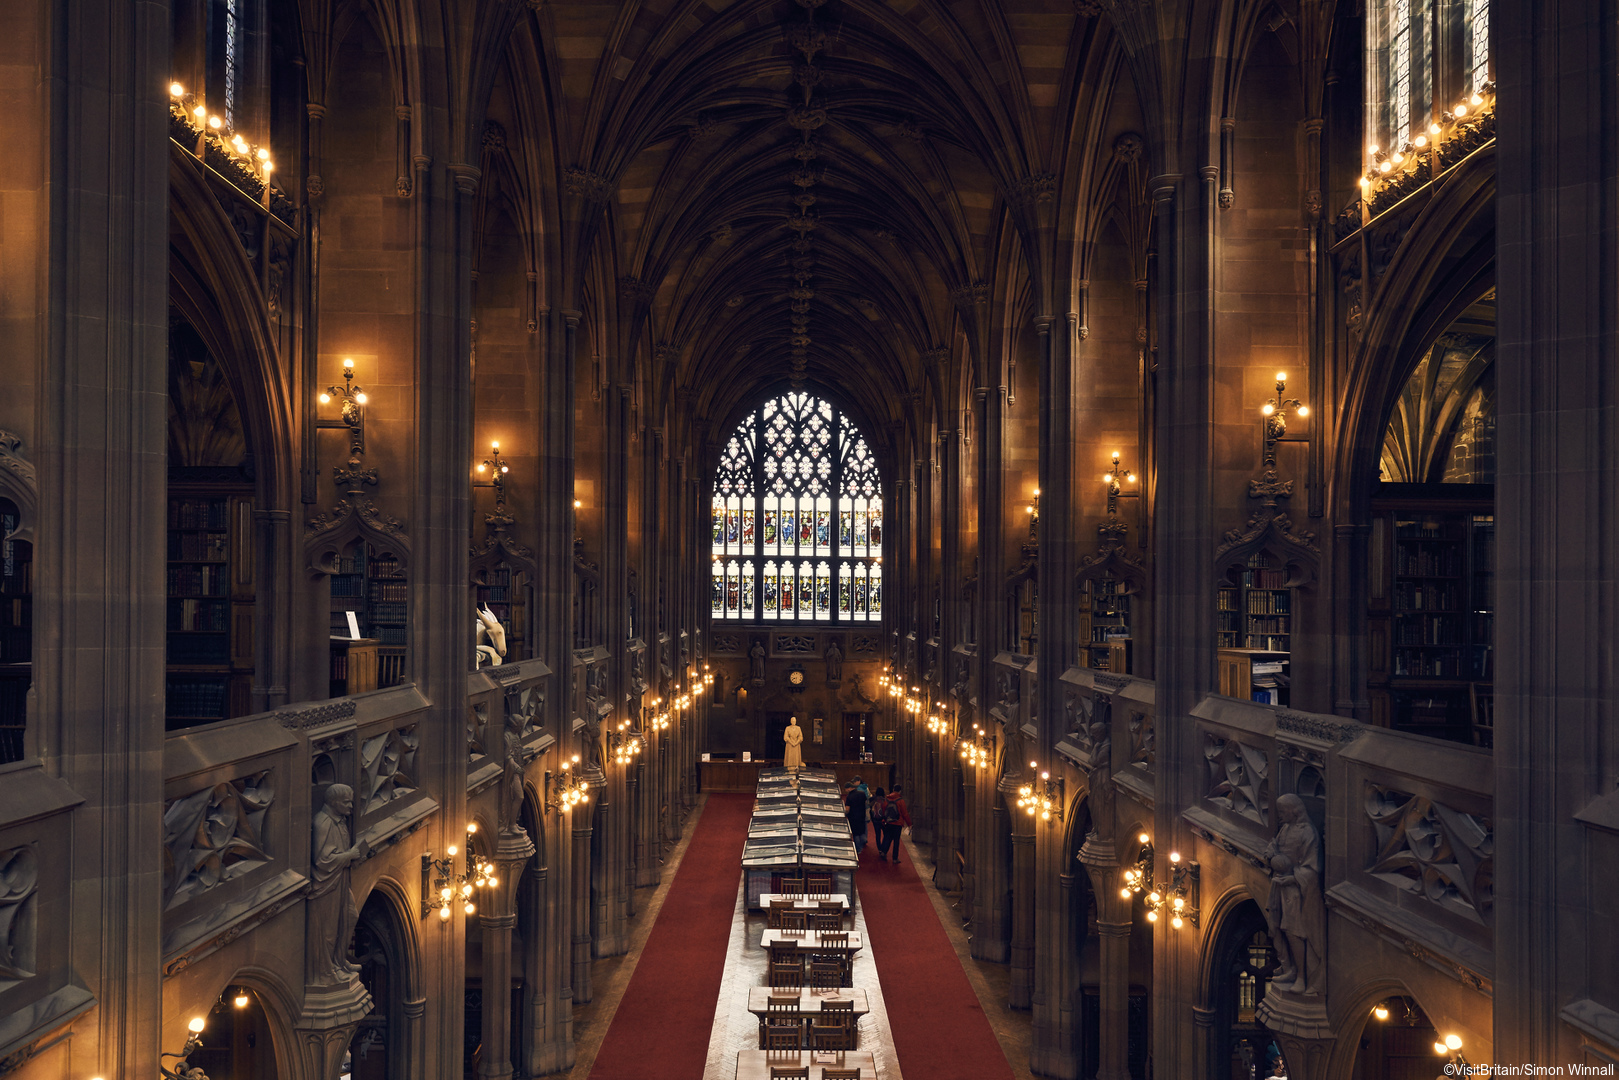 View into main gallery in John Ryland's Library